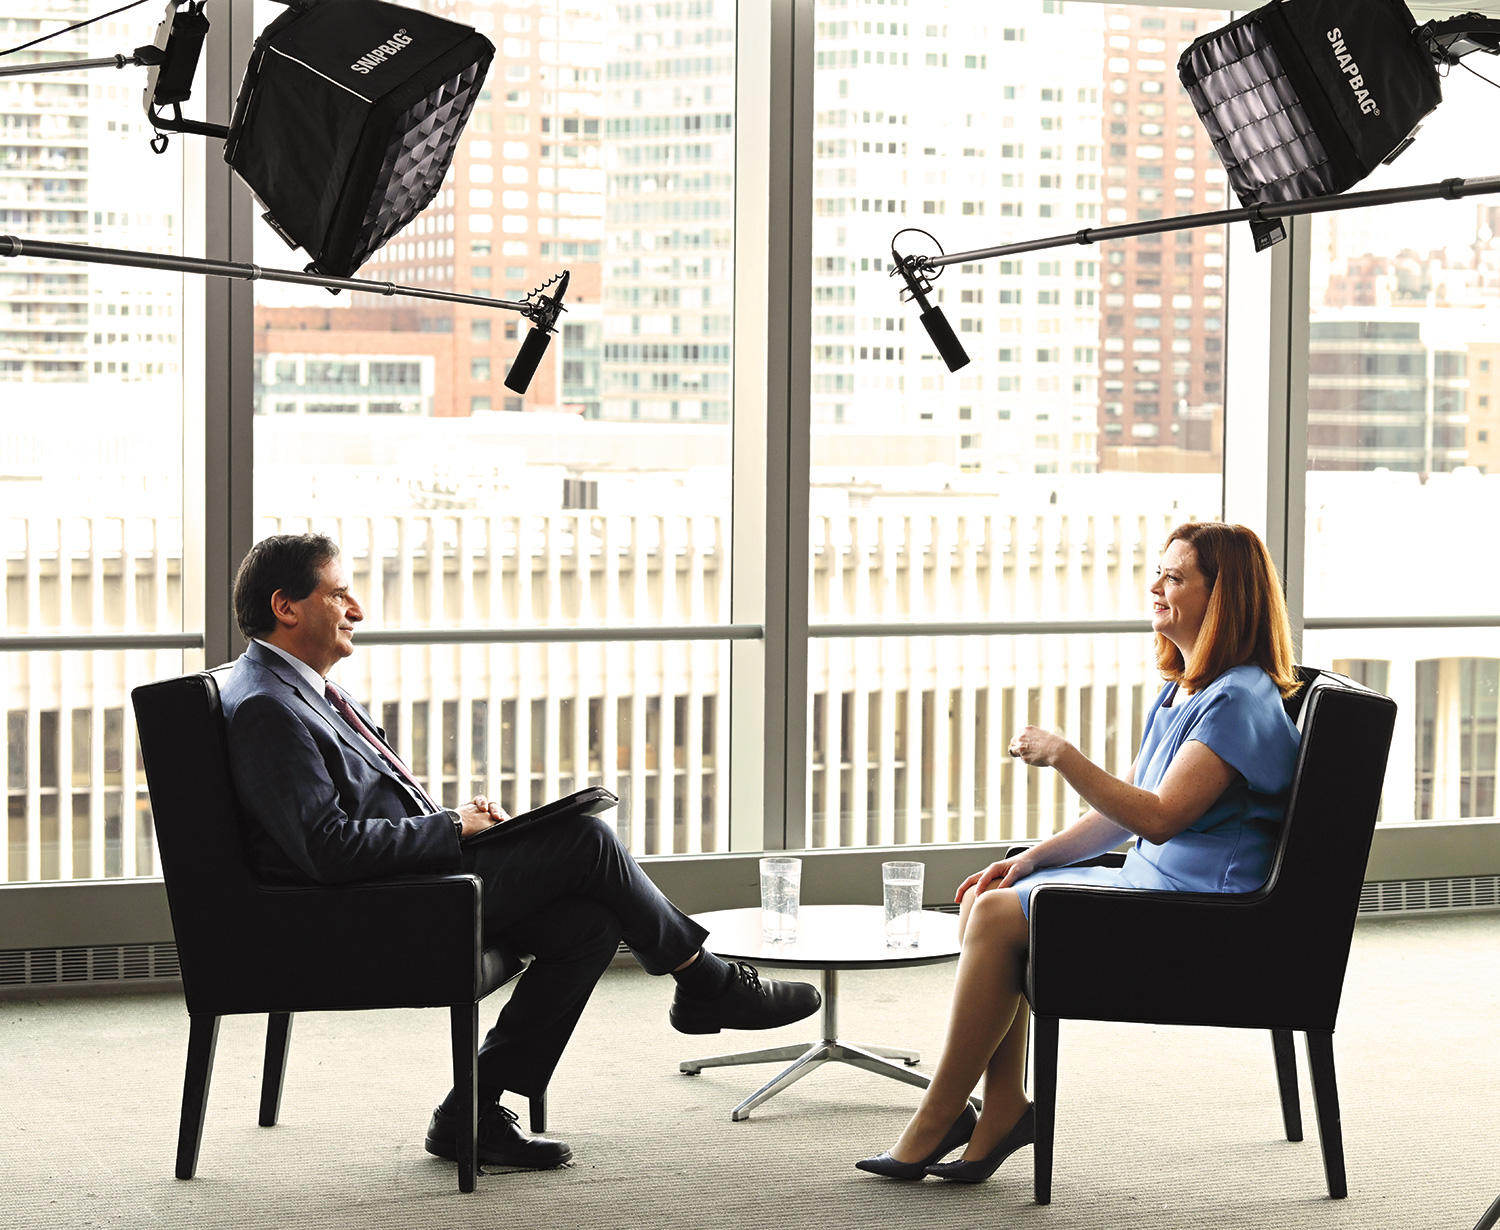 Dean Matthew Diller and President Tania Tetlow discuss leadership, lawyers, and more in a sit-down interview